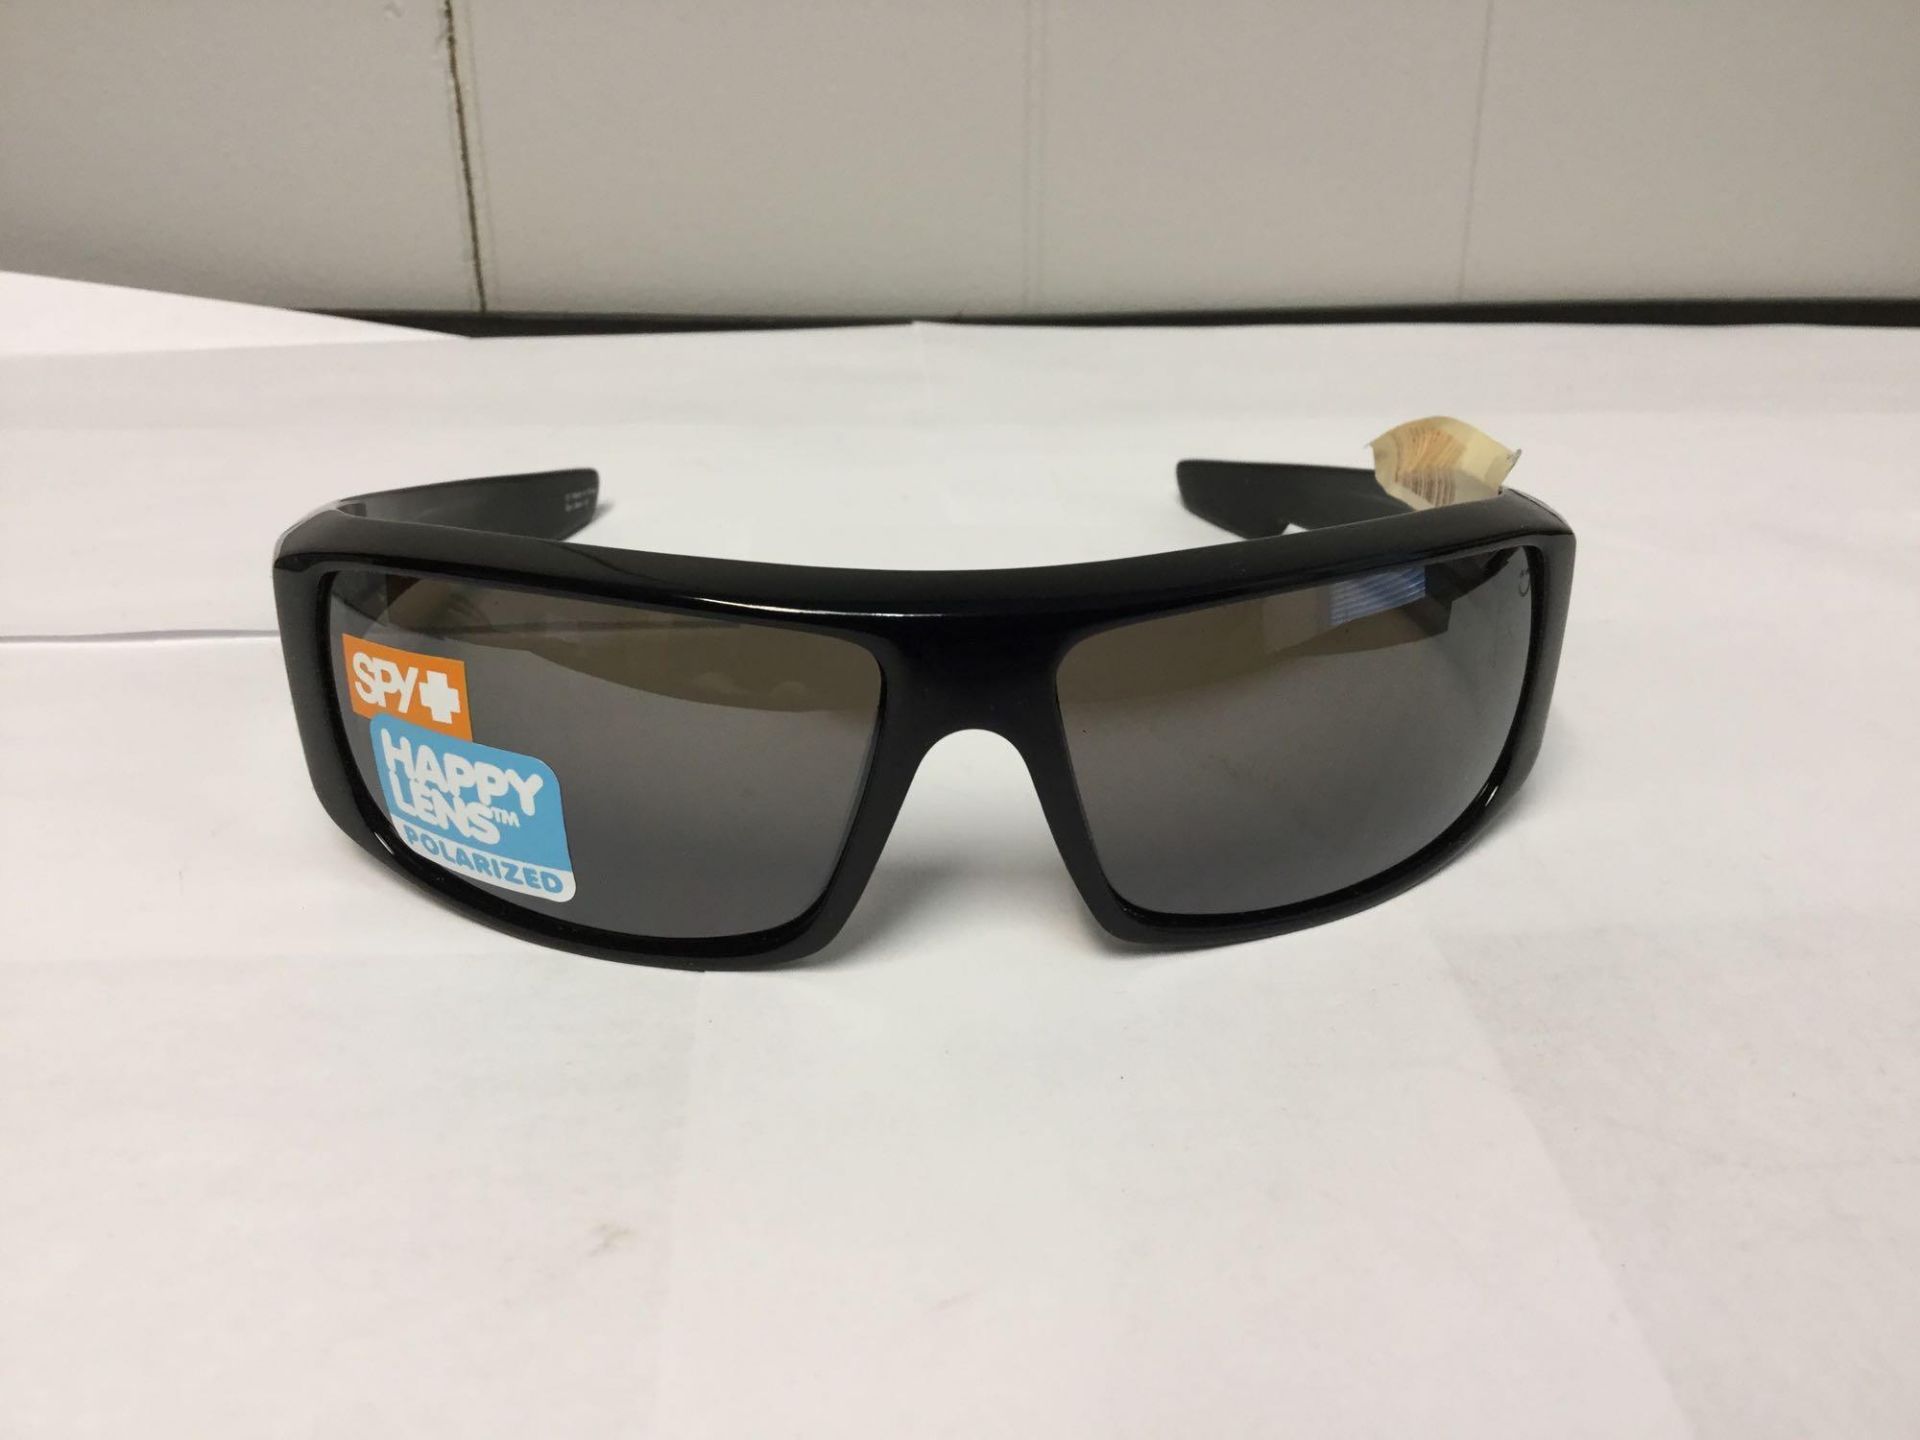 Spy Plus sunglasses with Box and bag Value $175 - Image 2 of 3